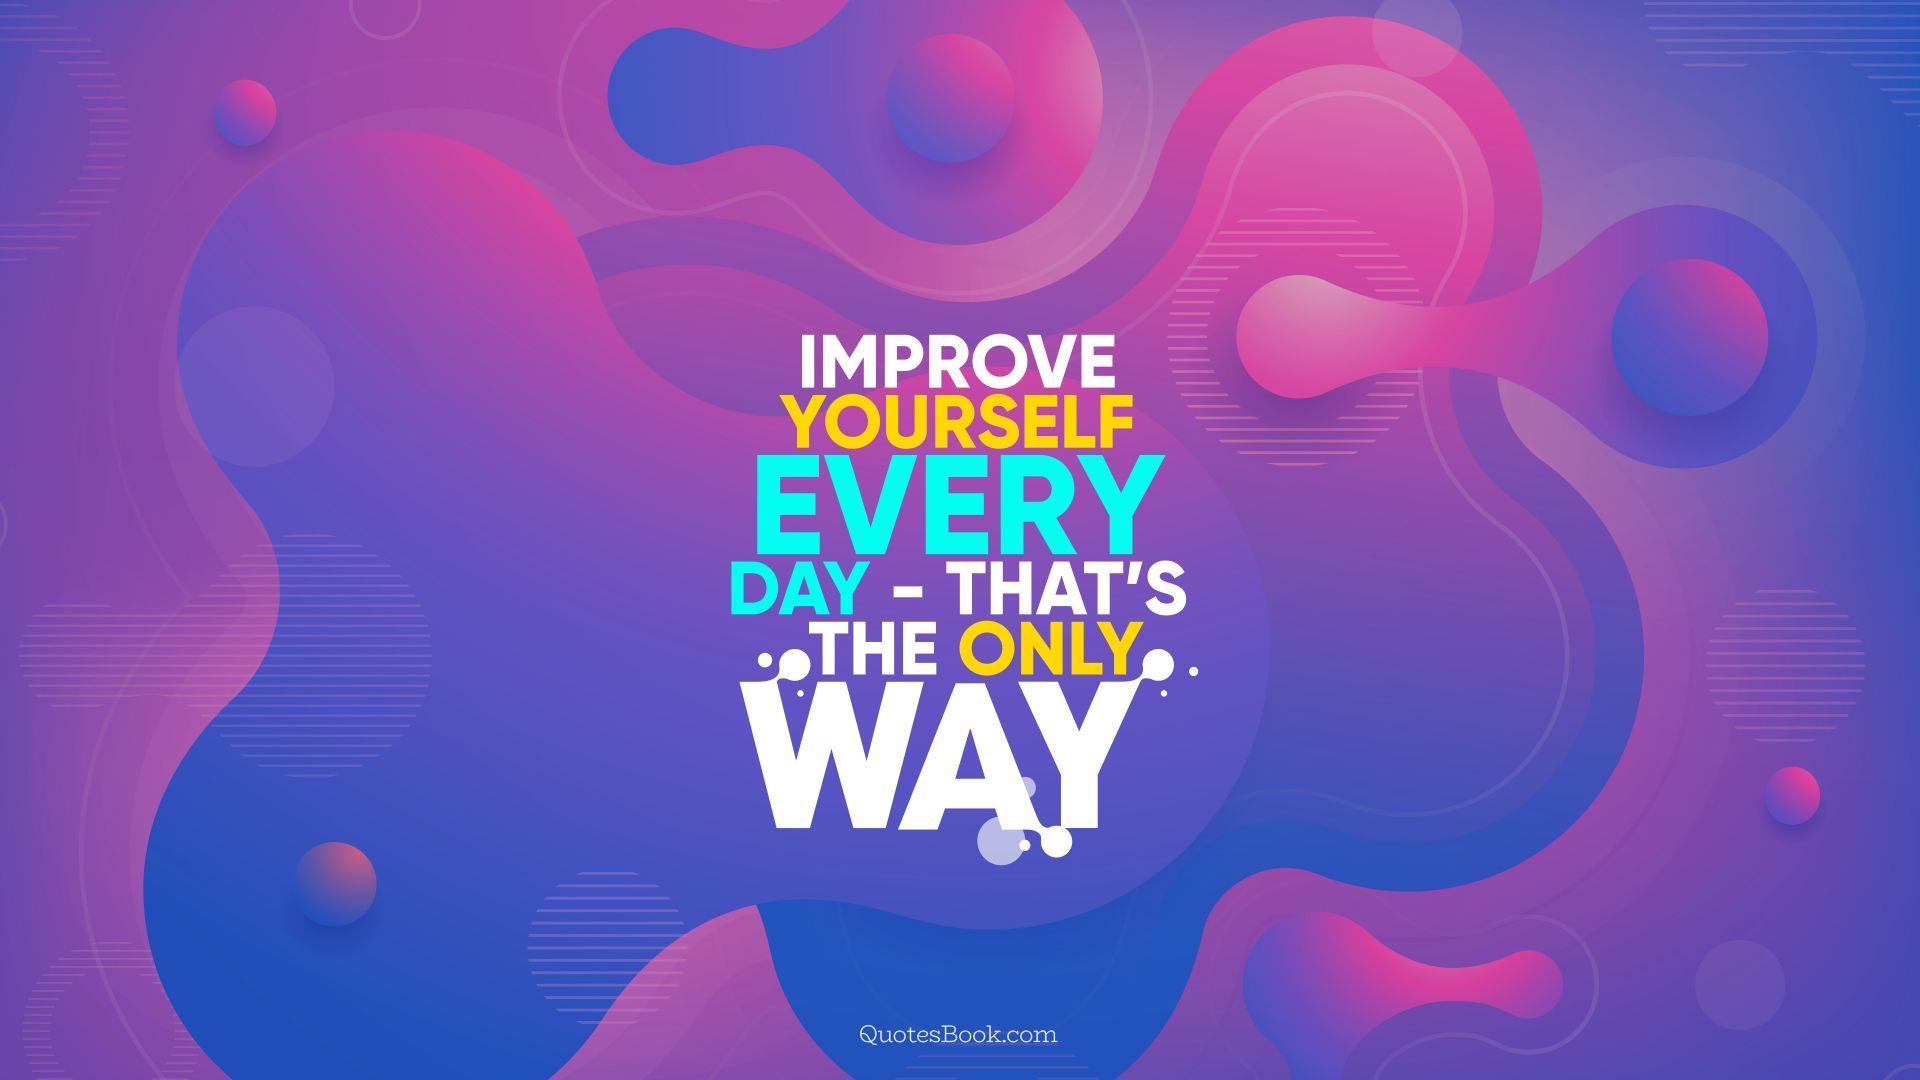 Improve yourself every day - that’s the only way